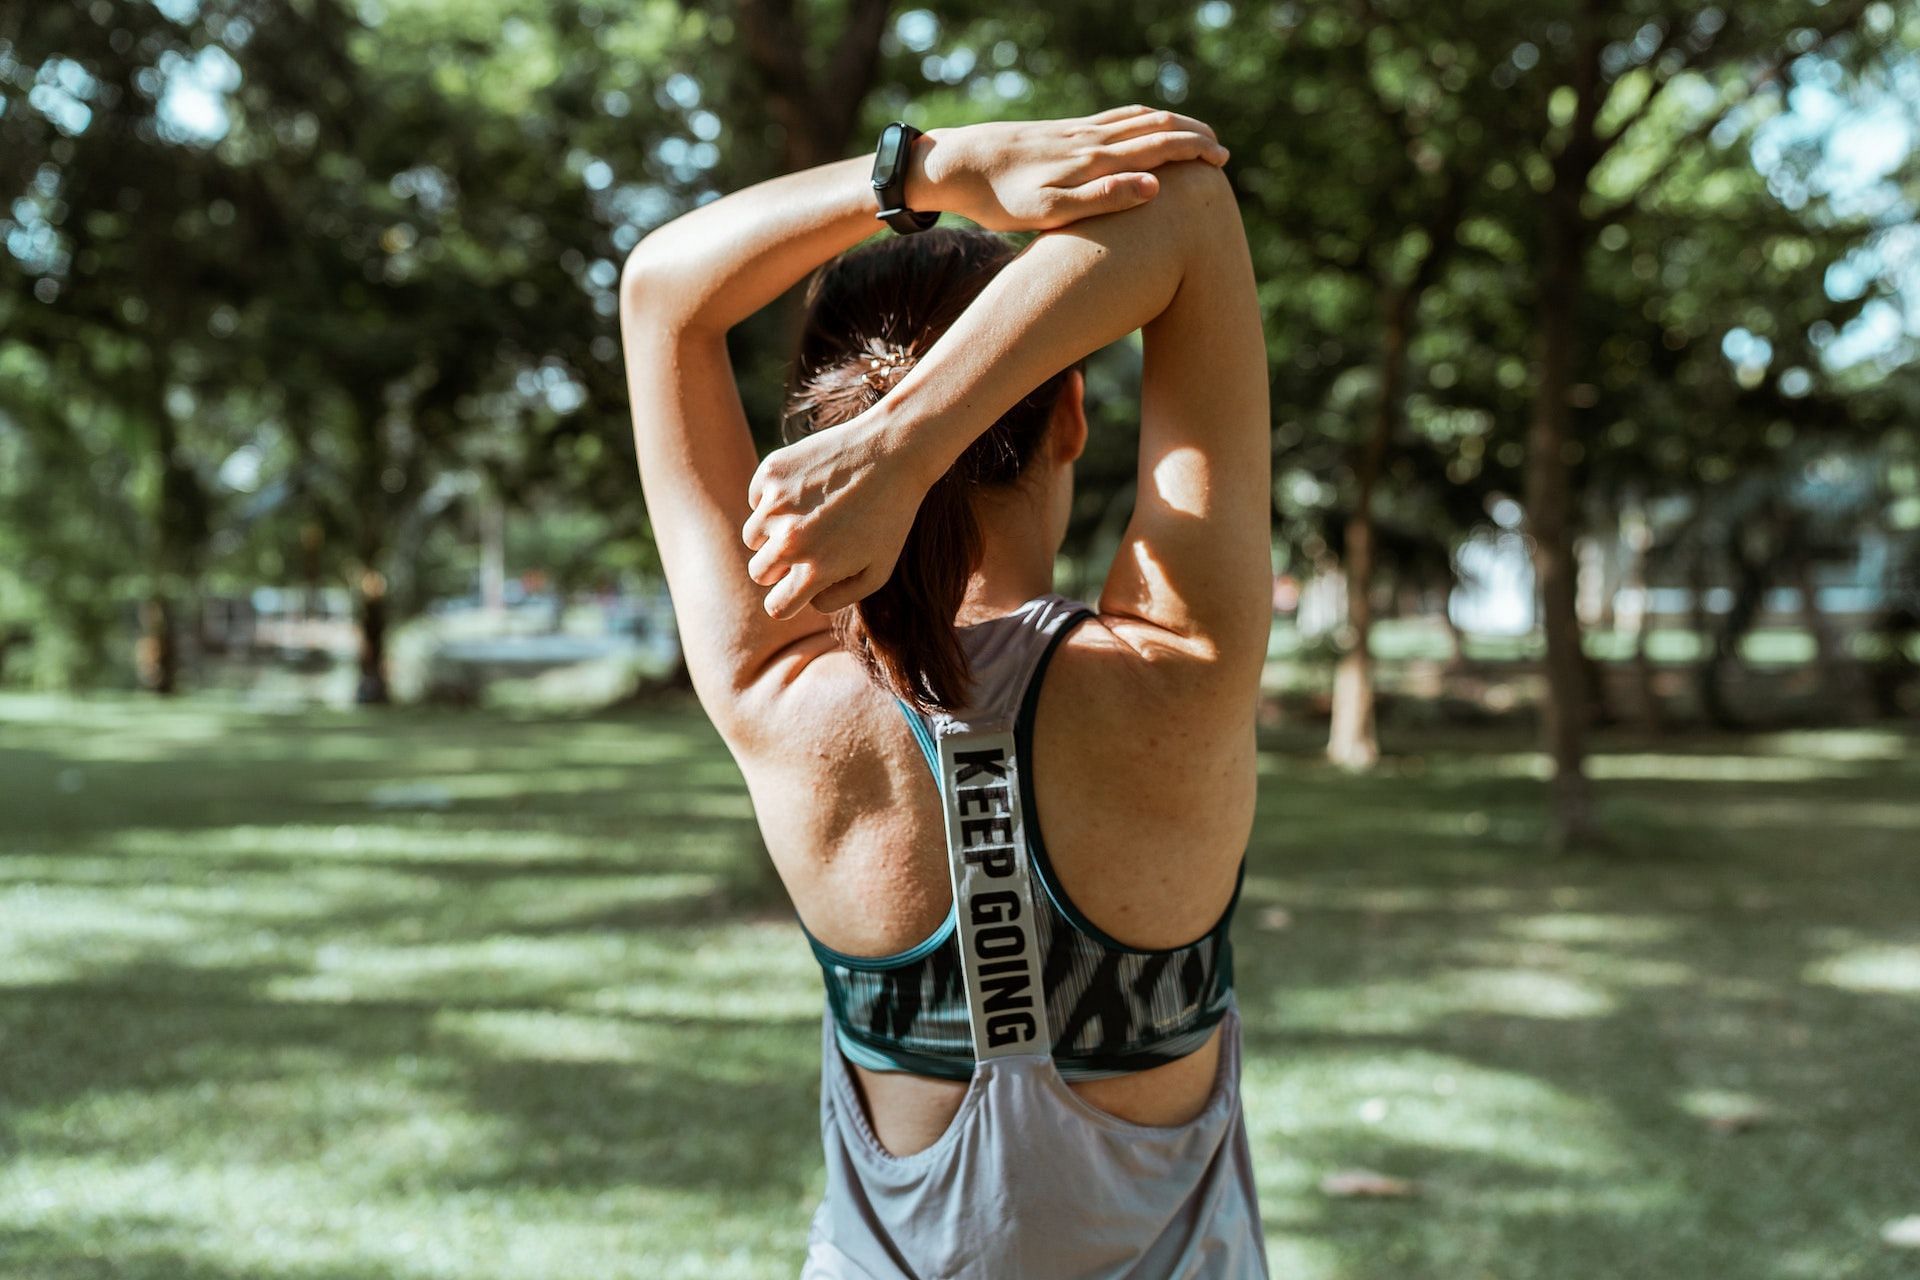 Stiffness and pain in the shoulder blades can be a symptom of hunched back. (Photo via Pexels/Ketut Subiyanto)